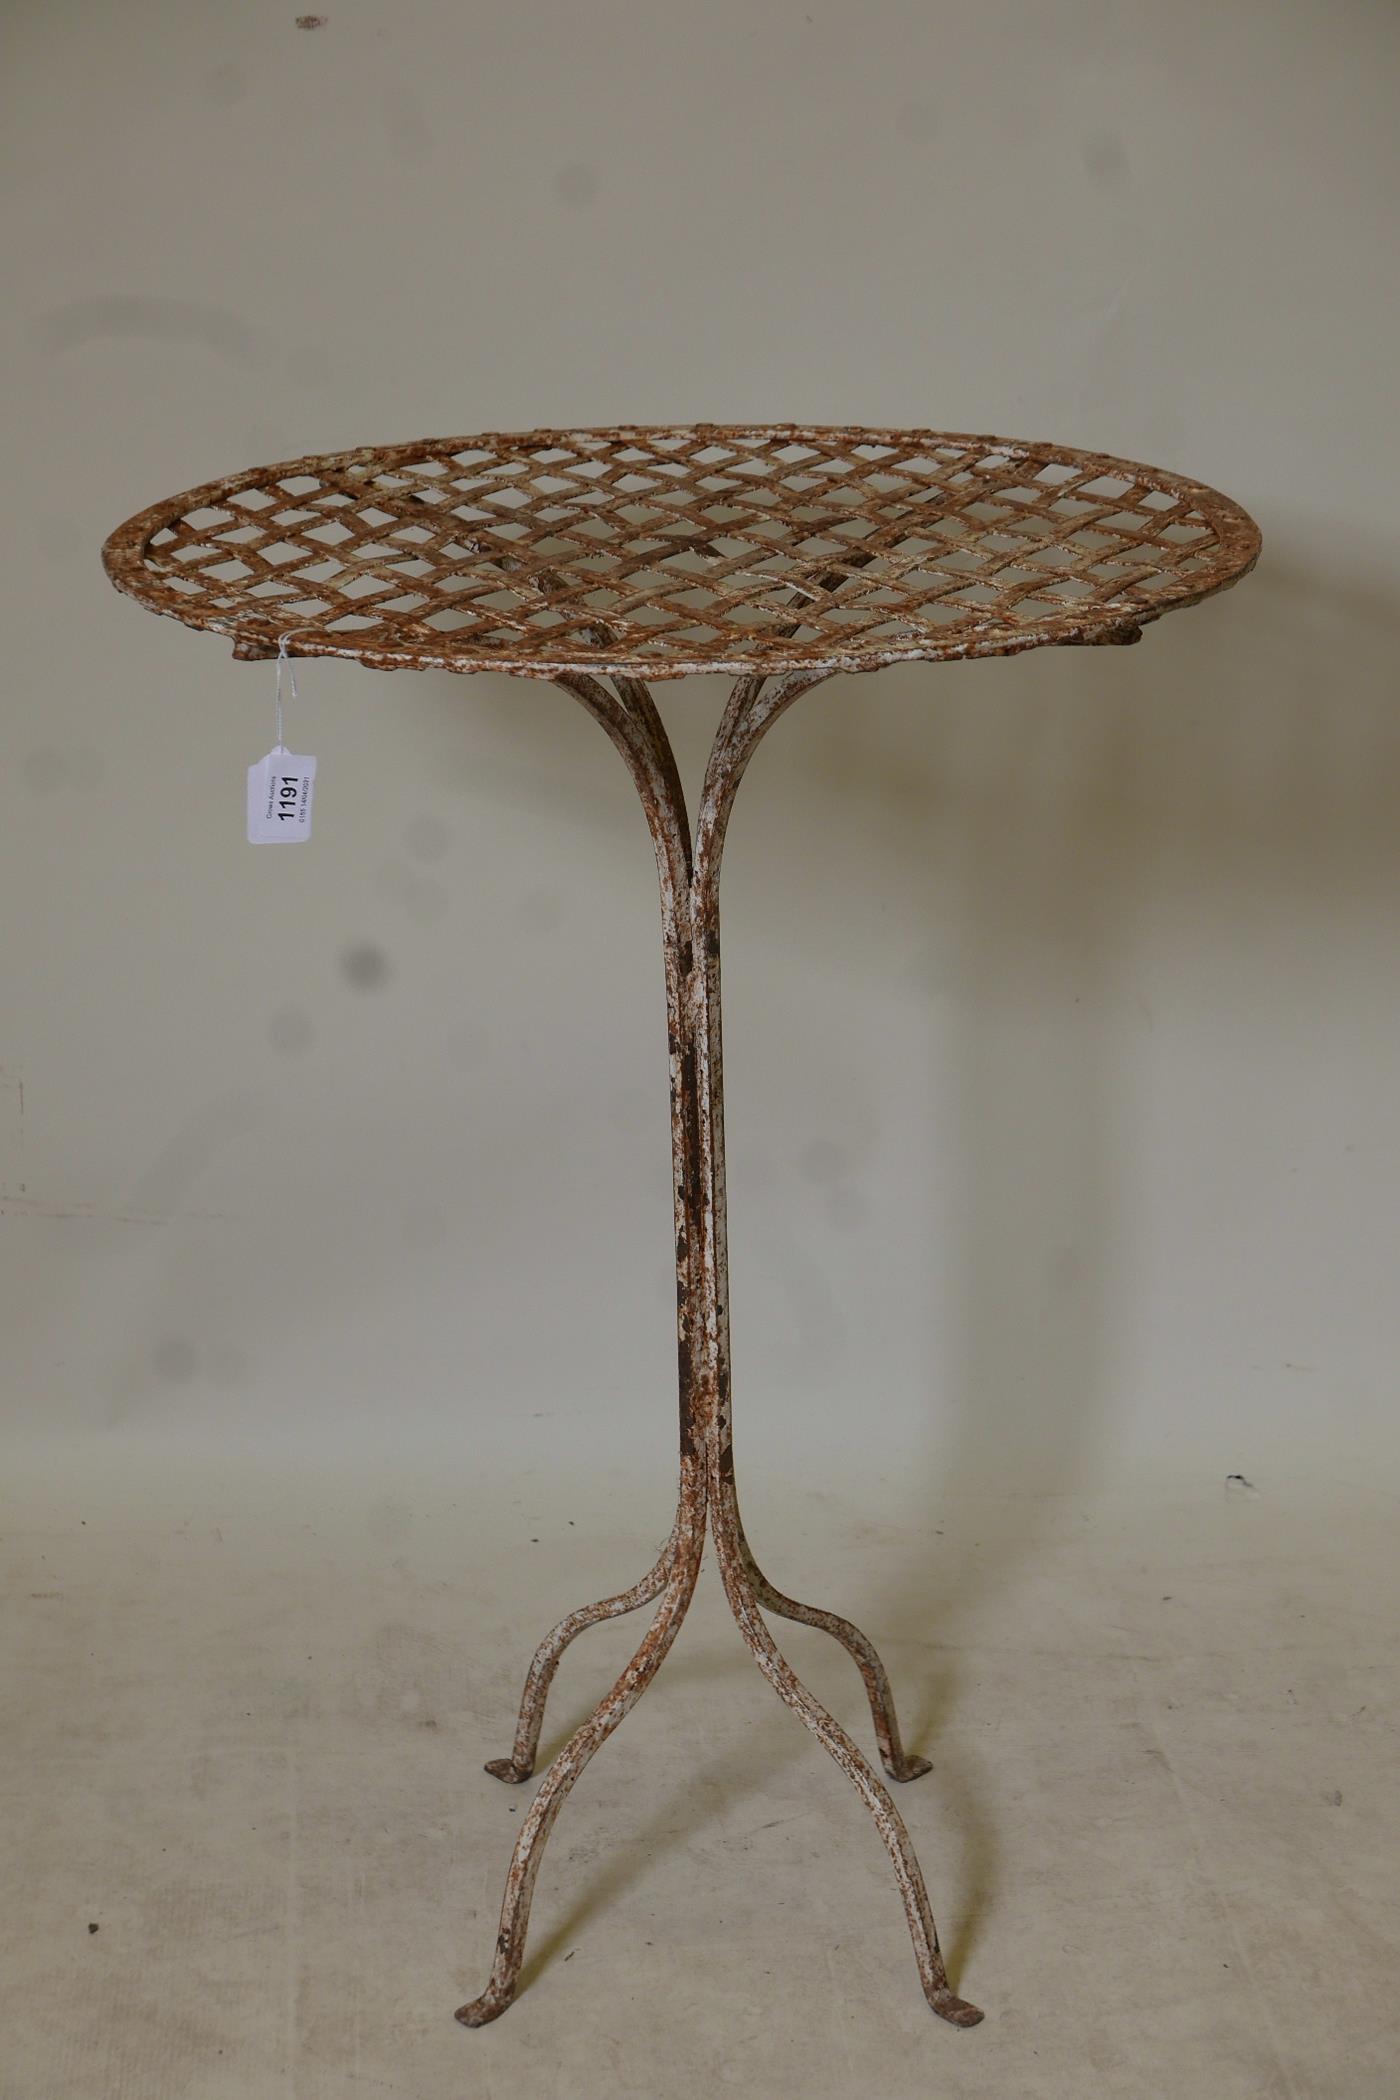 A vintage French painted wrought iron bistro table, 22" diameter x 30" high